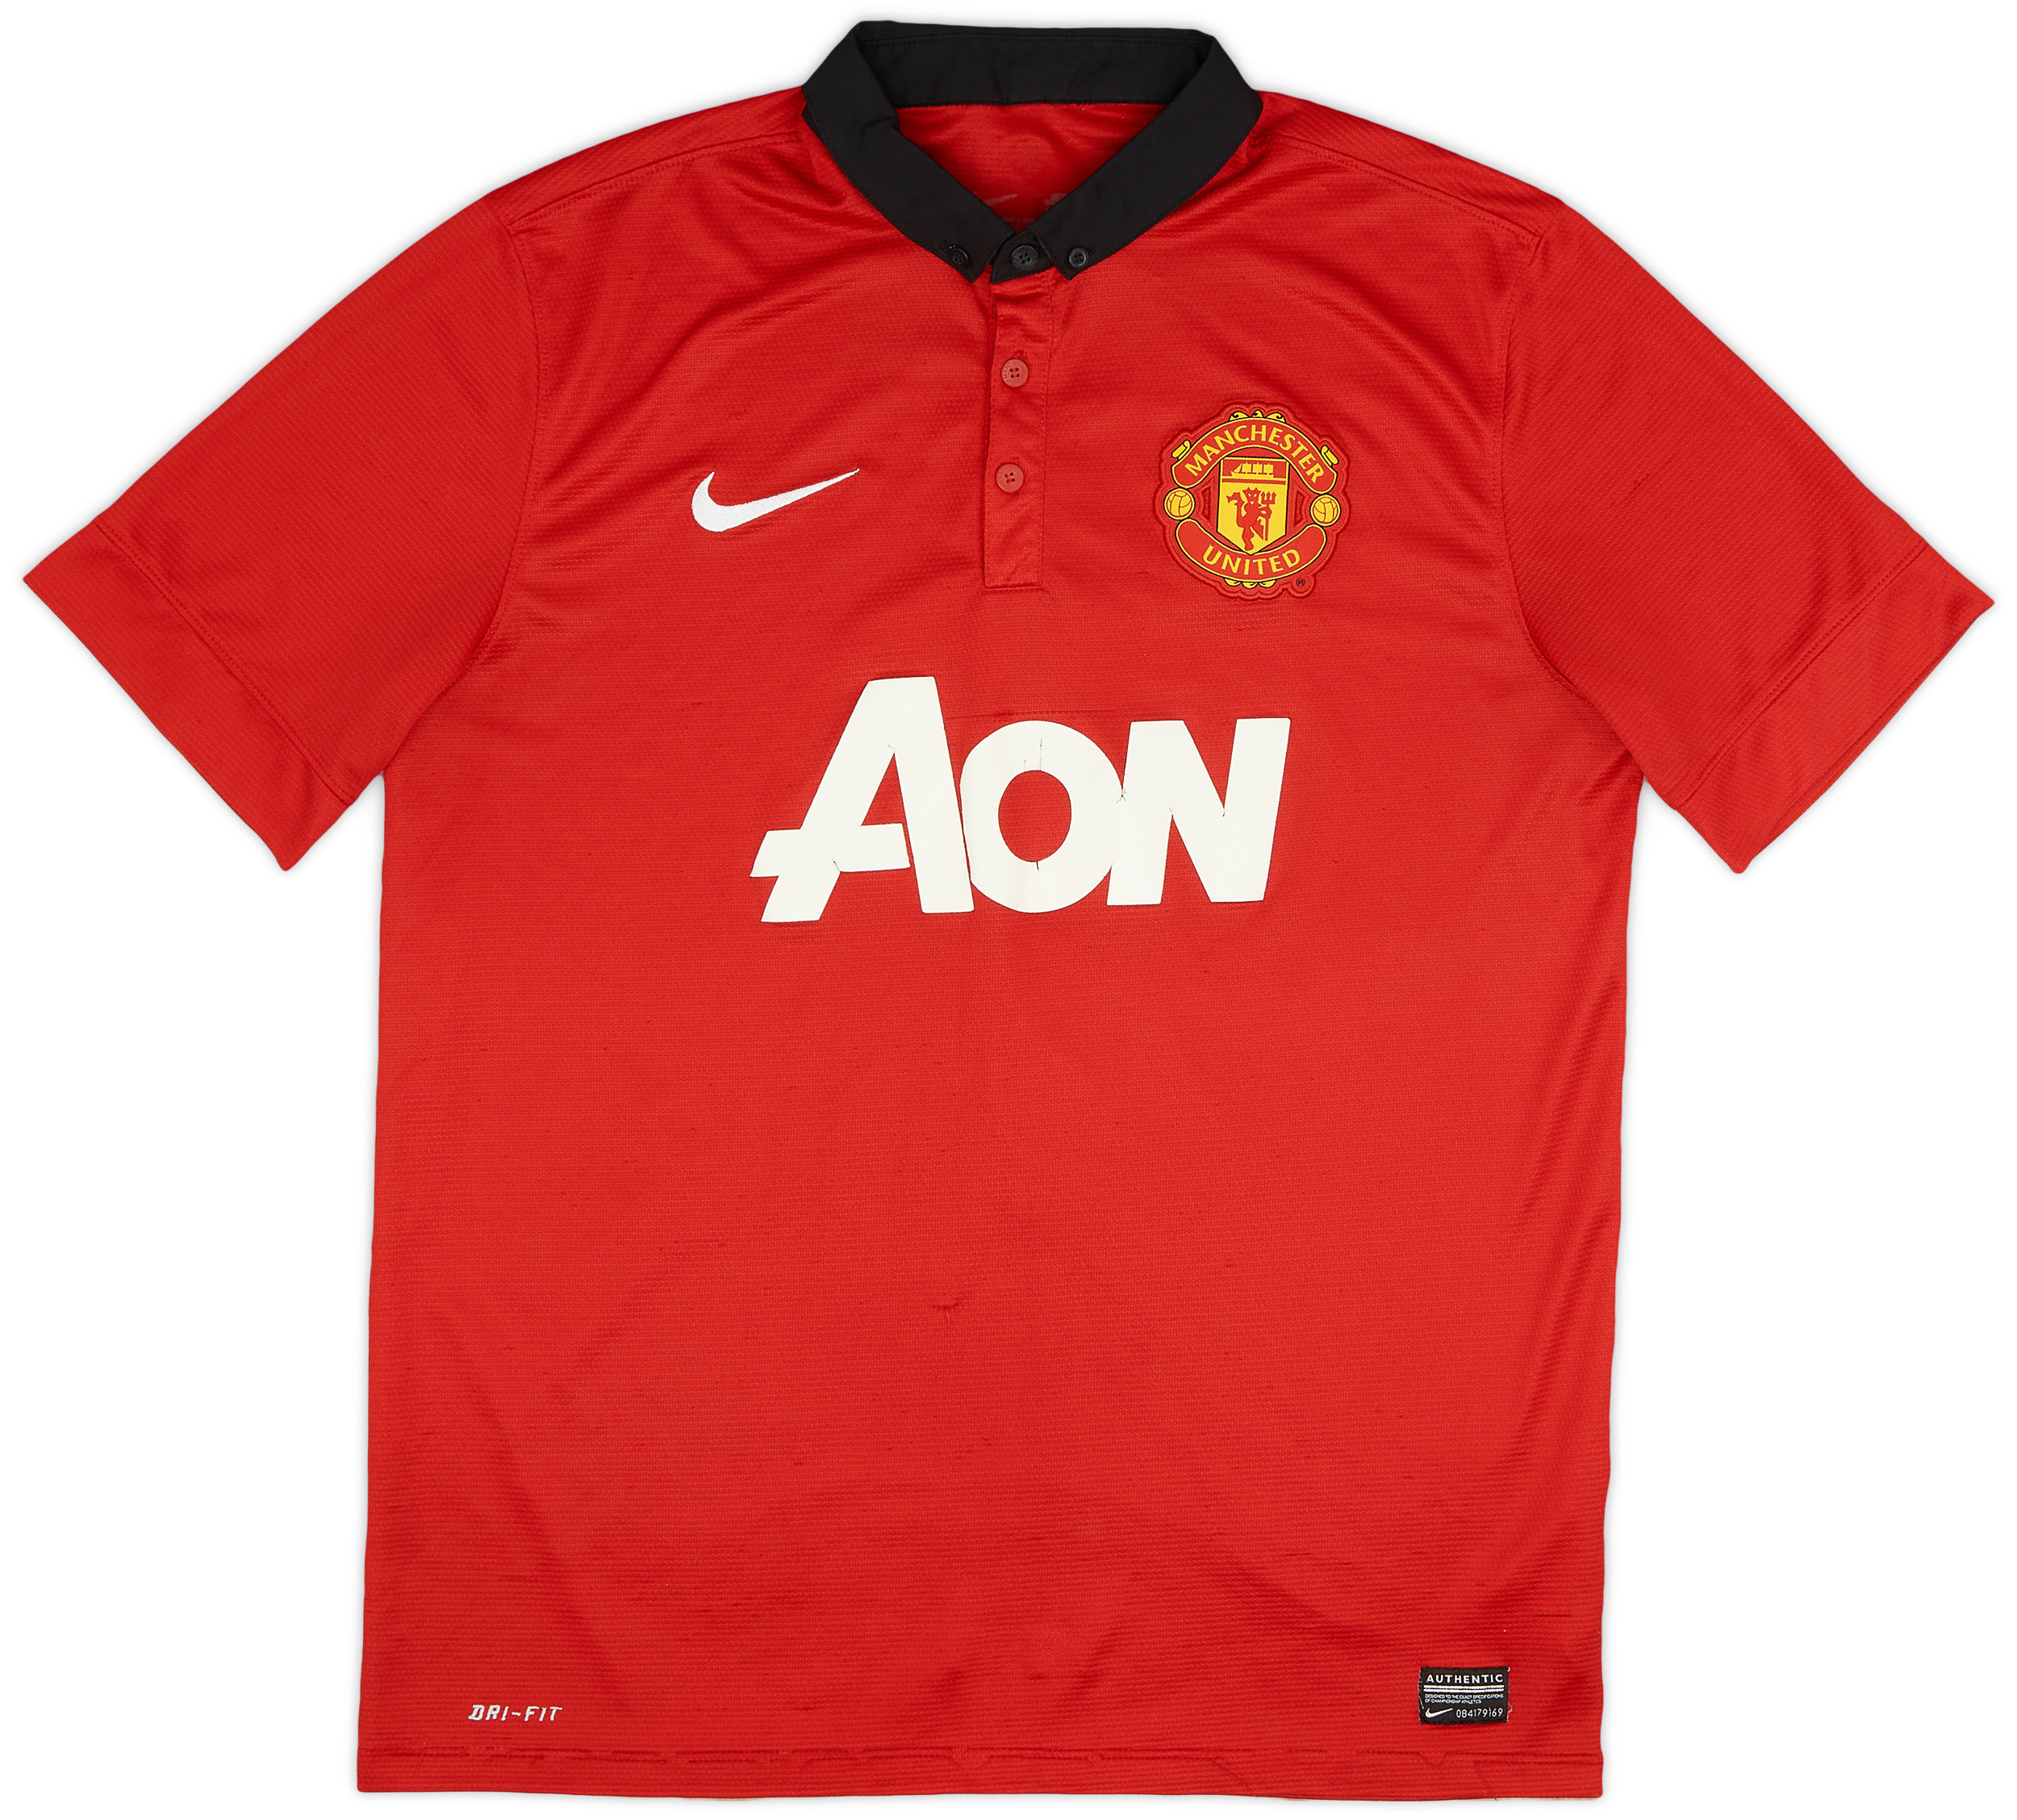 2013-14 Manchester United Home Shirt - 5/10 - ()